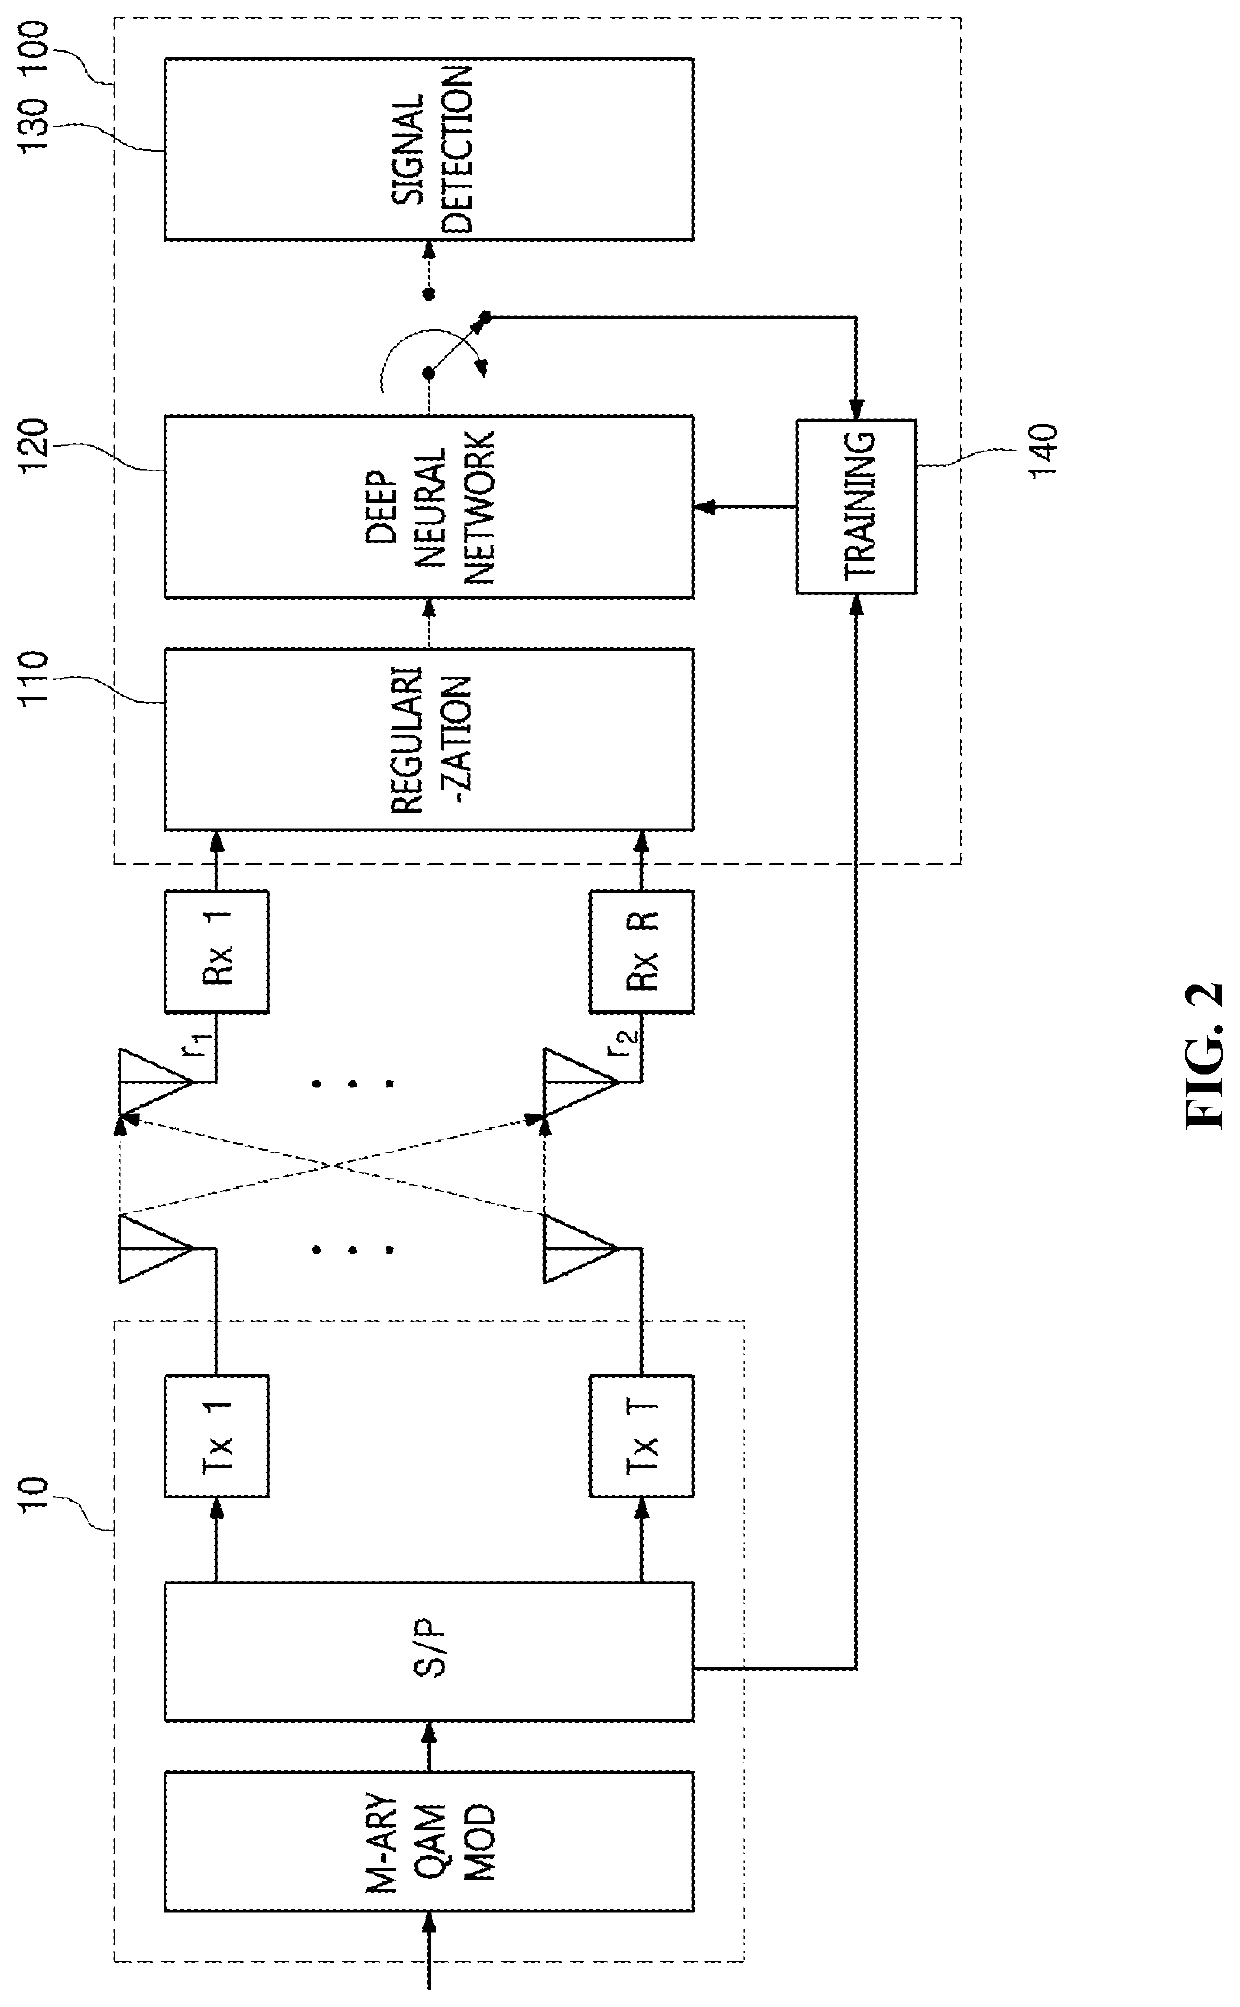 Signal-multiplexing apparatus and method based on machine learning